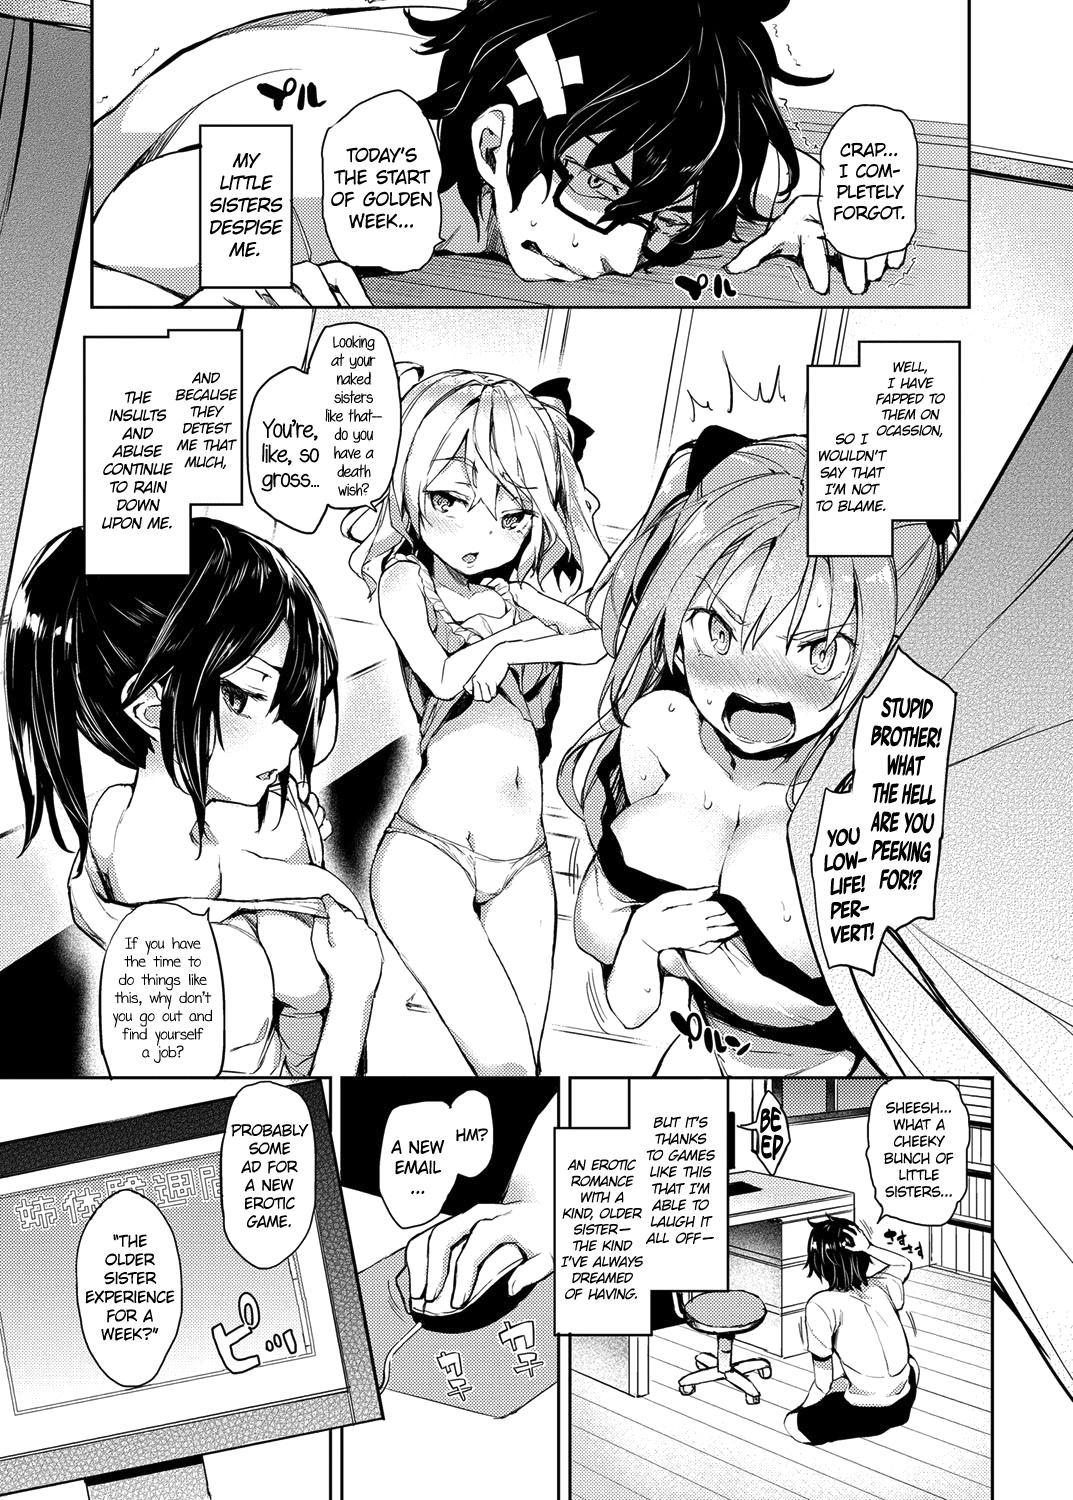 Ane Taiken Shuukan | The Older Sister Experience for a Week Ch. 1-3 2